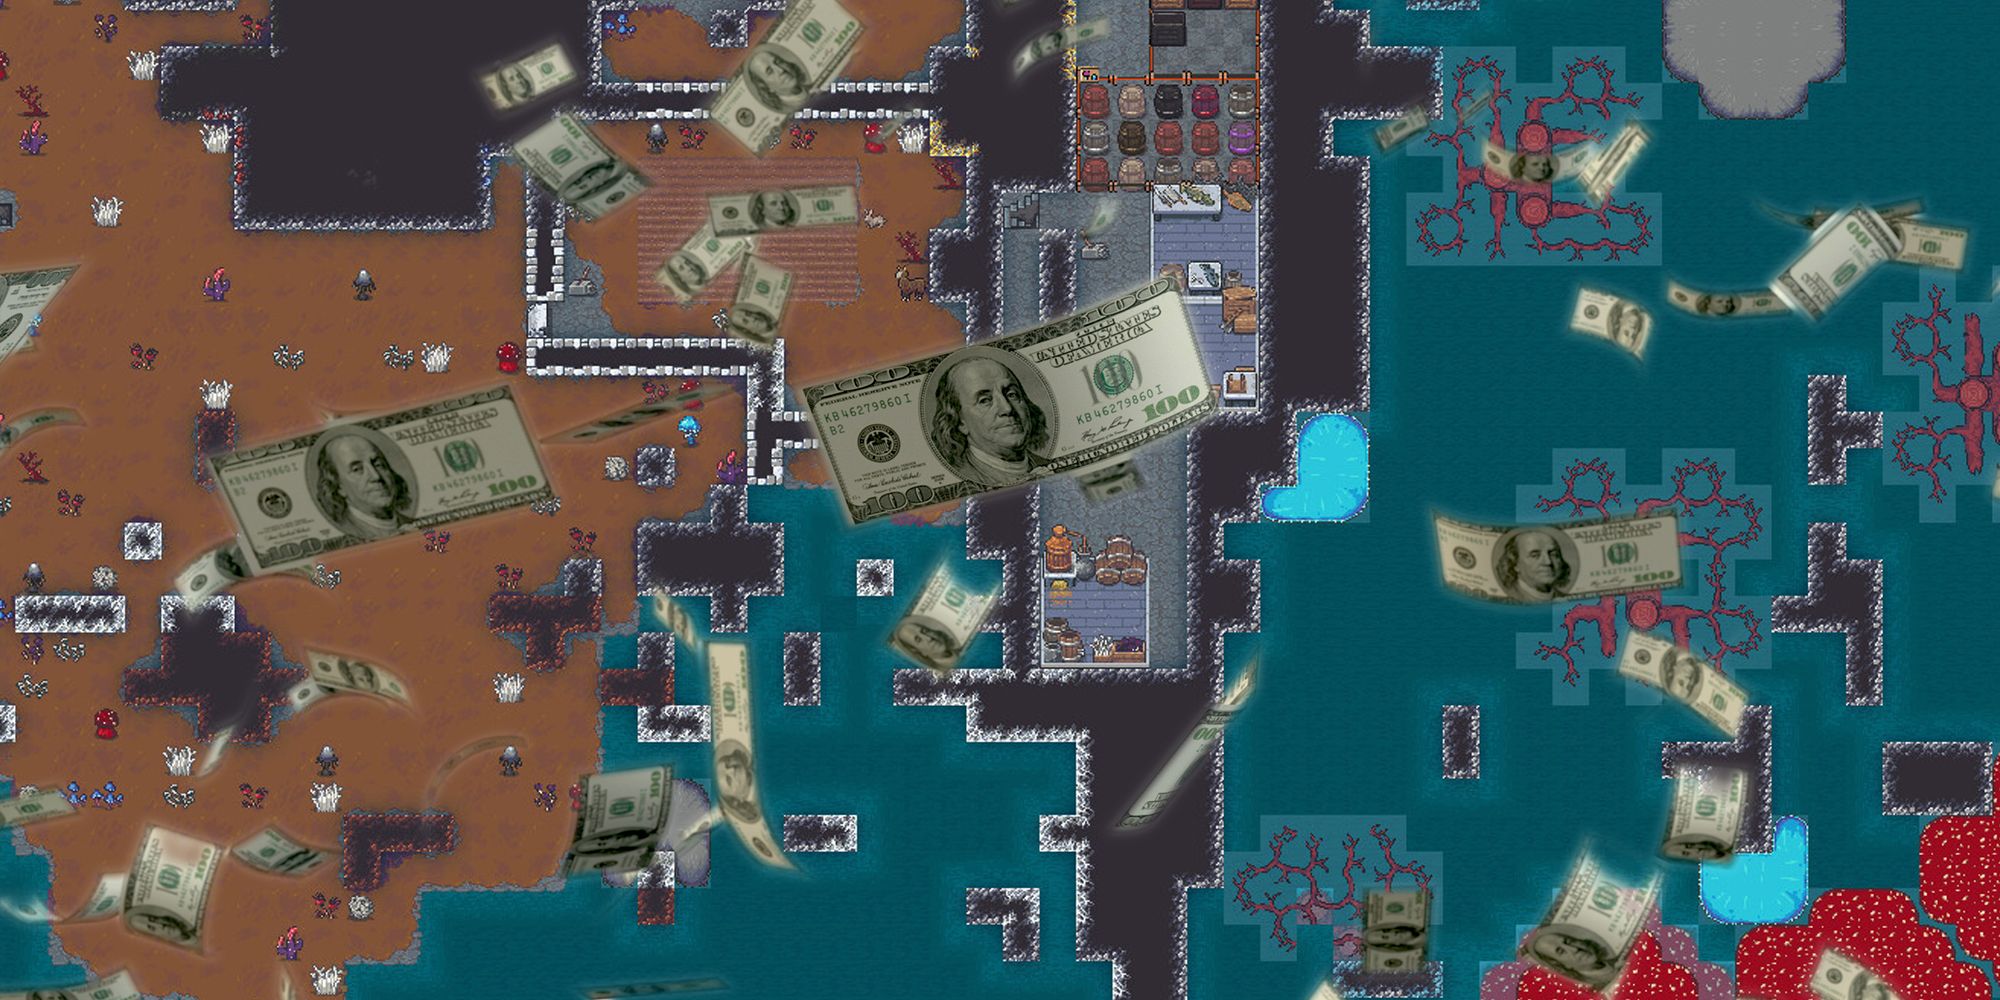 An overview of a Dwarf Fortress map with US dollar bills floating over it 